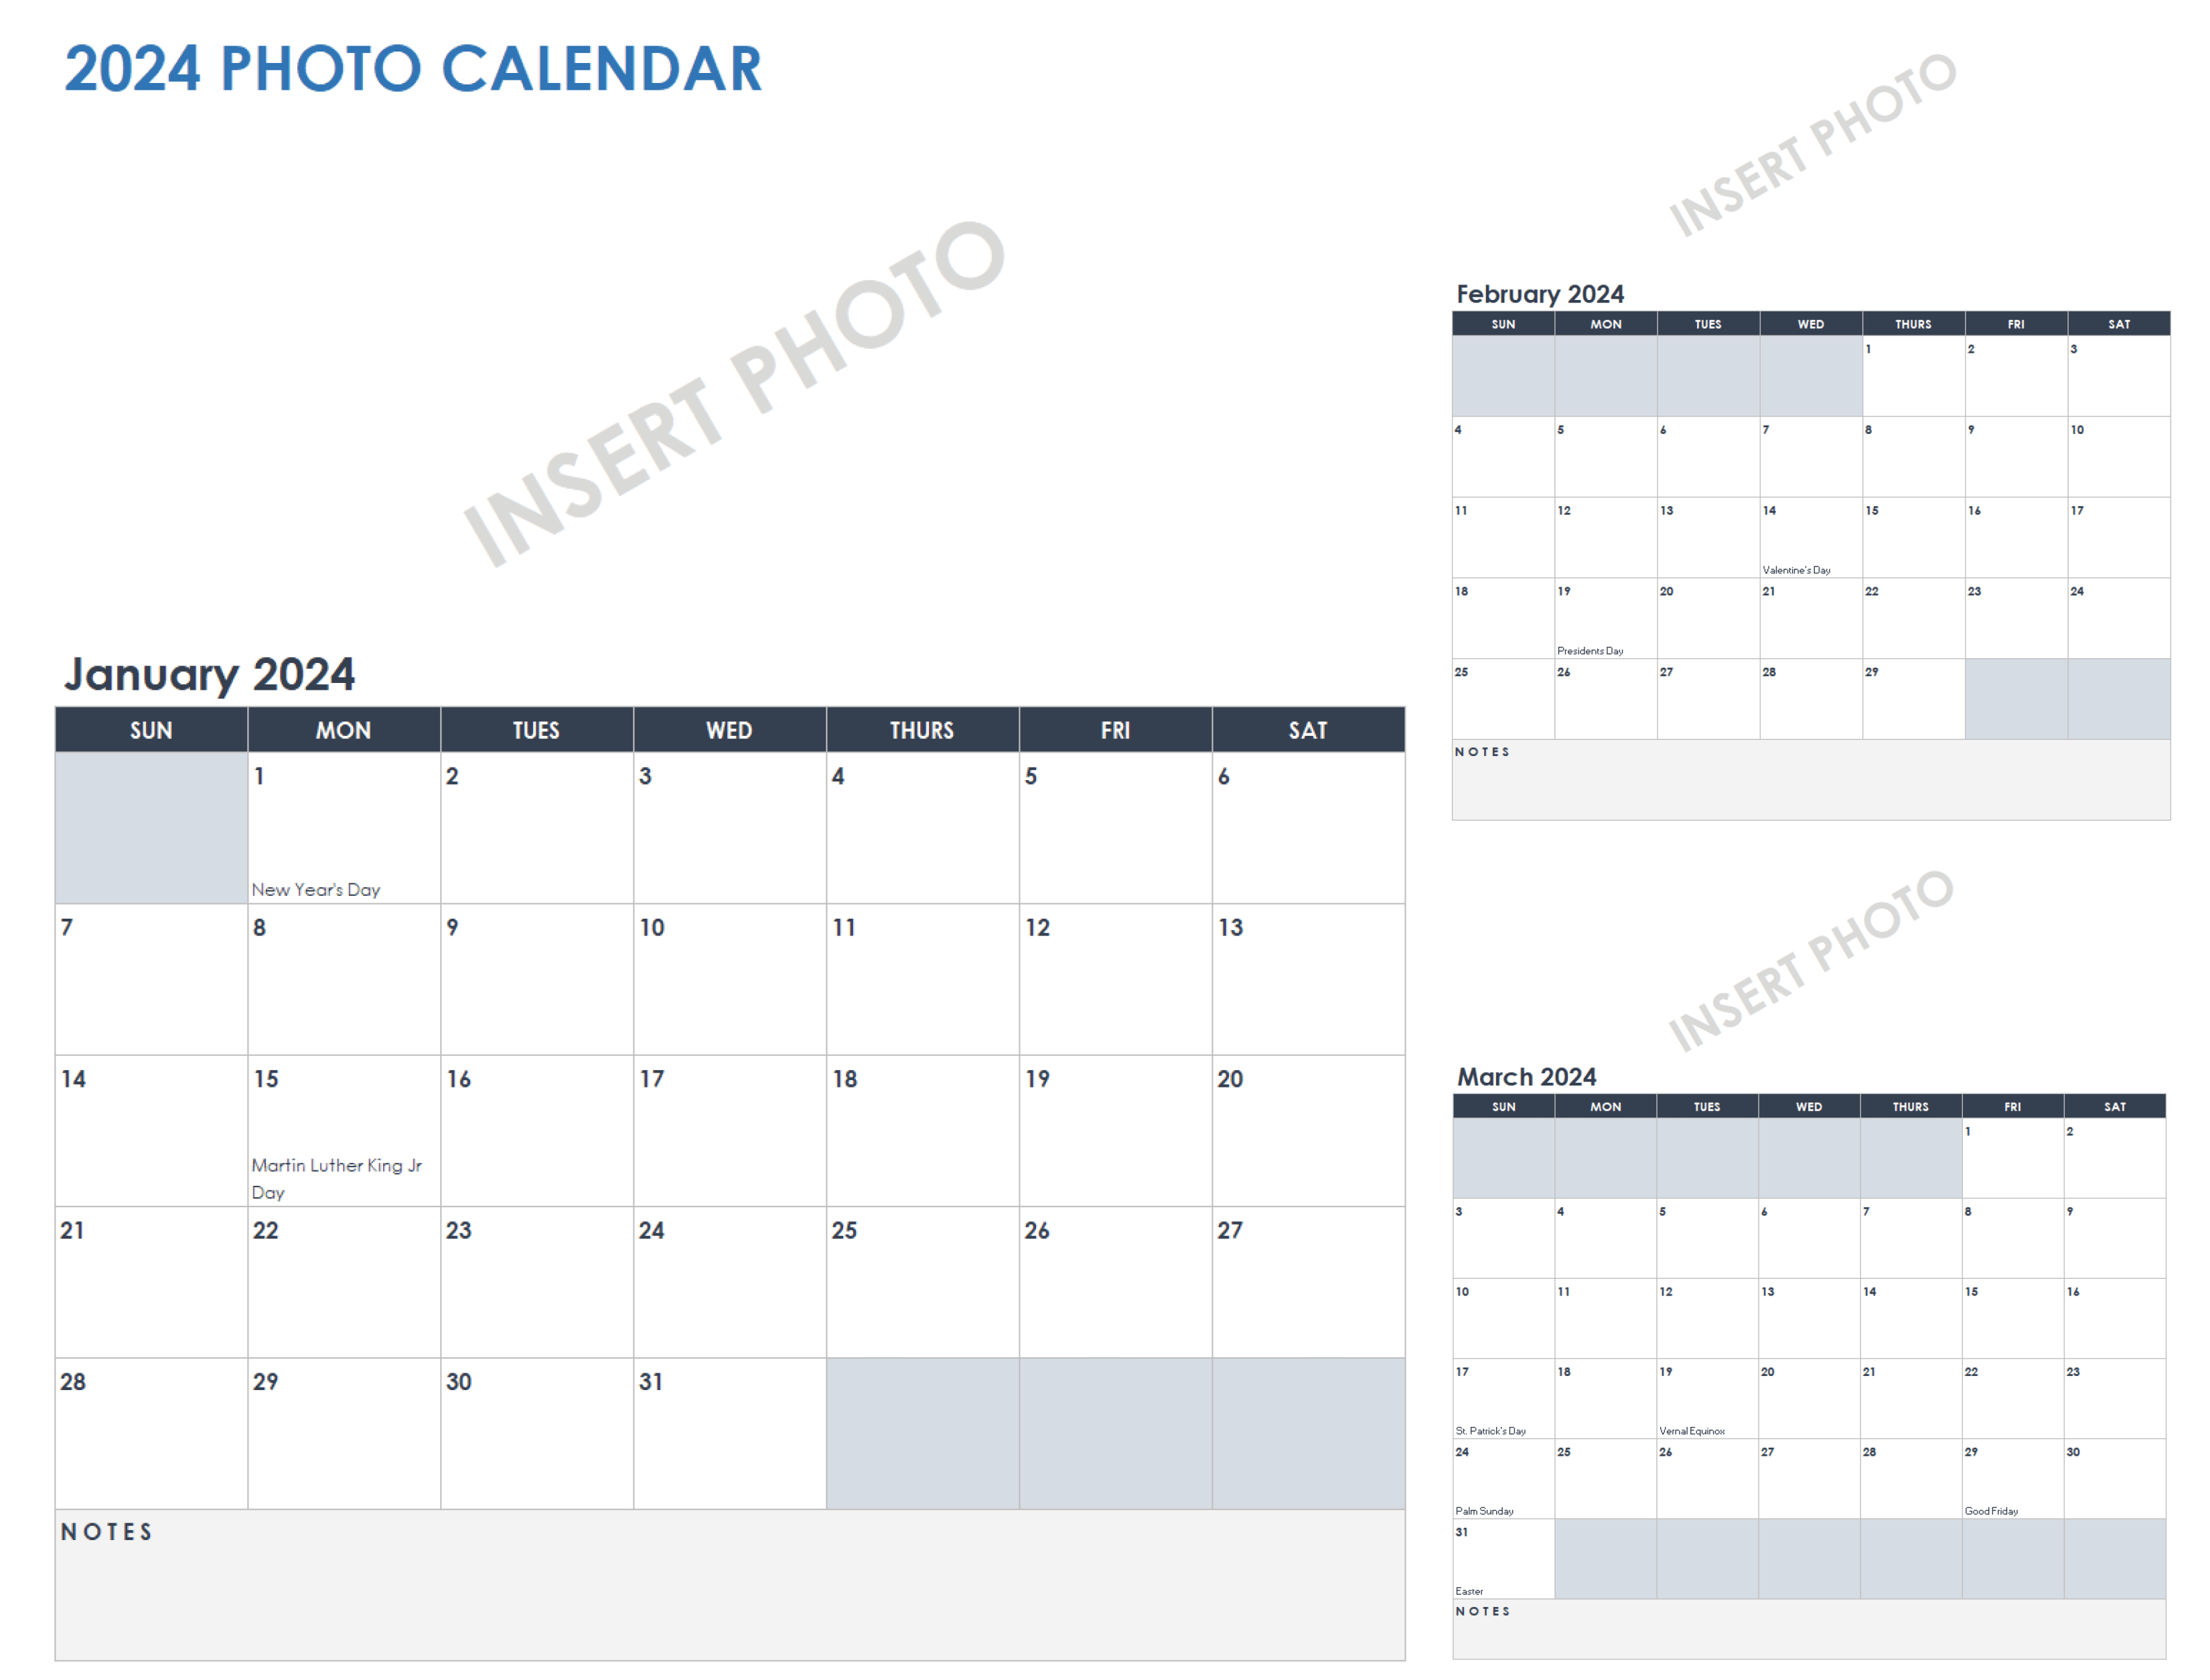 Best Practices For Using A 2024 Printable Calendar Template 2020